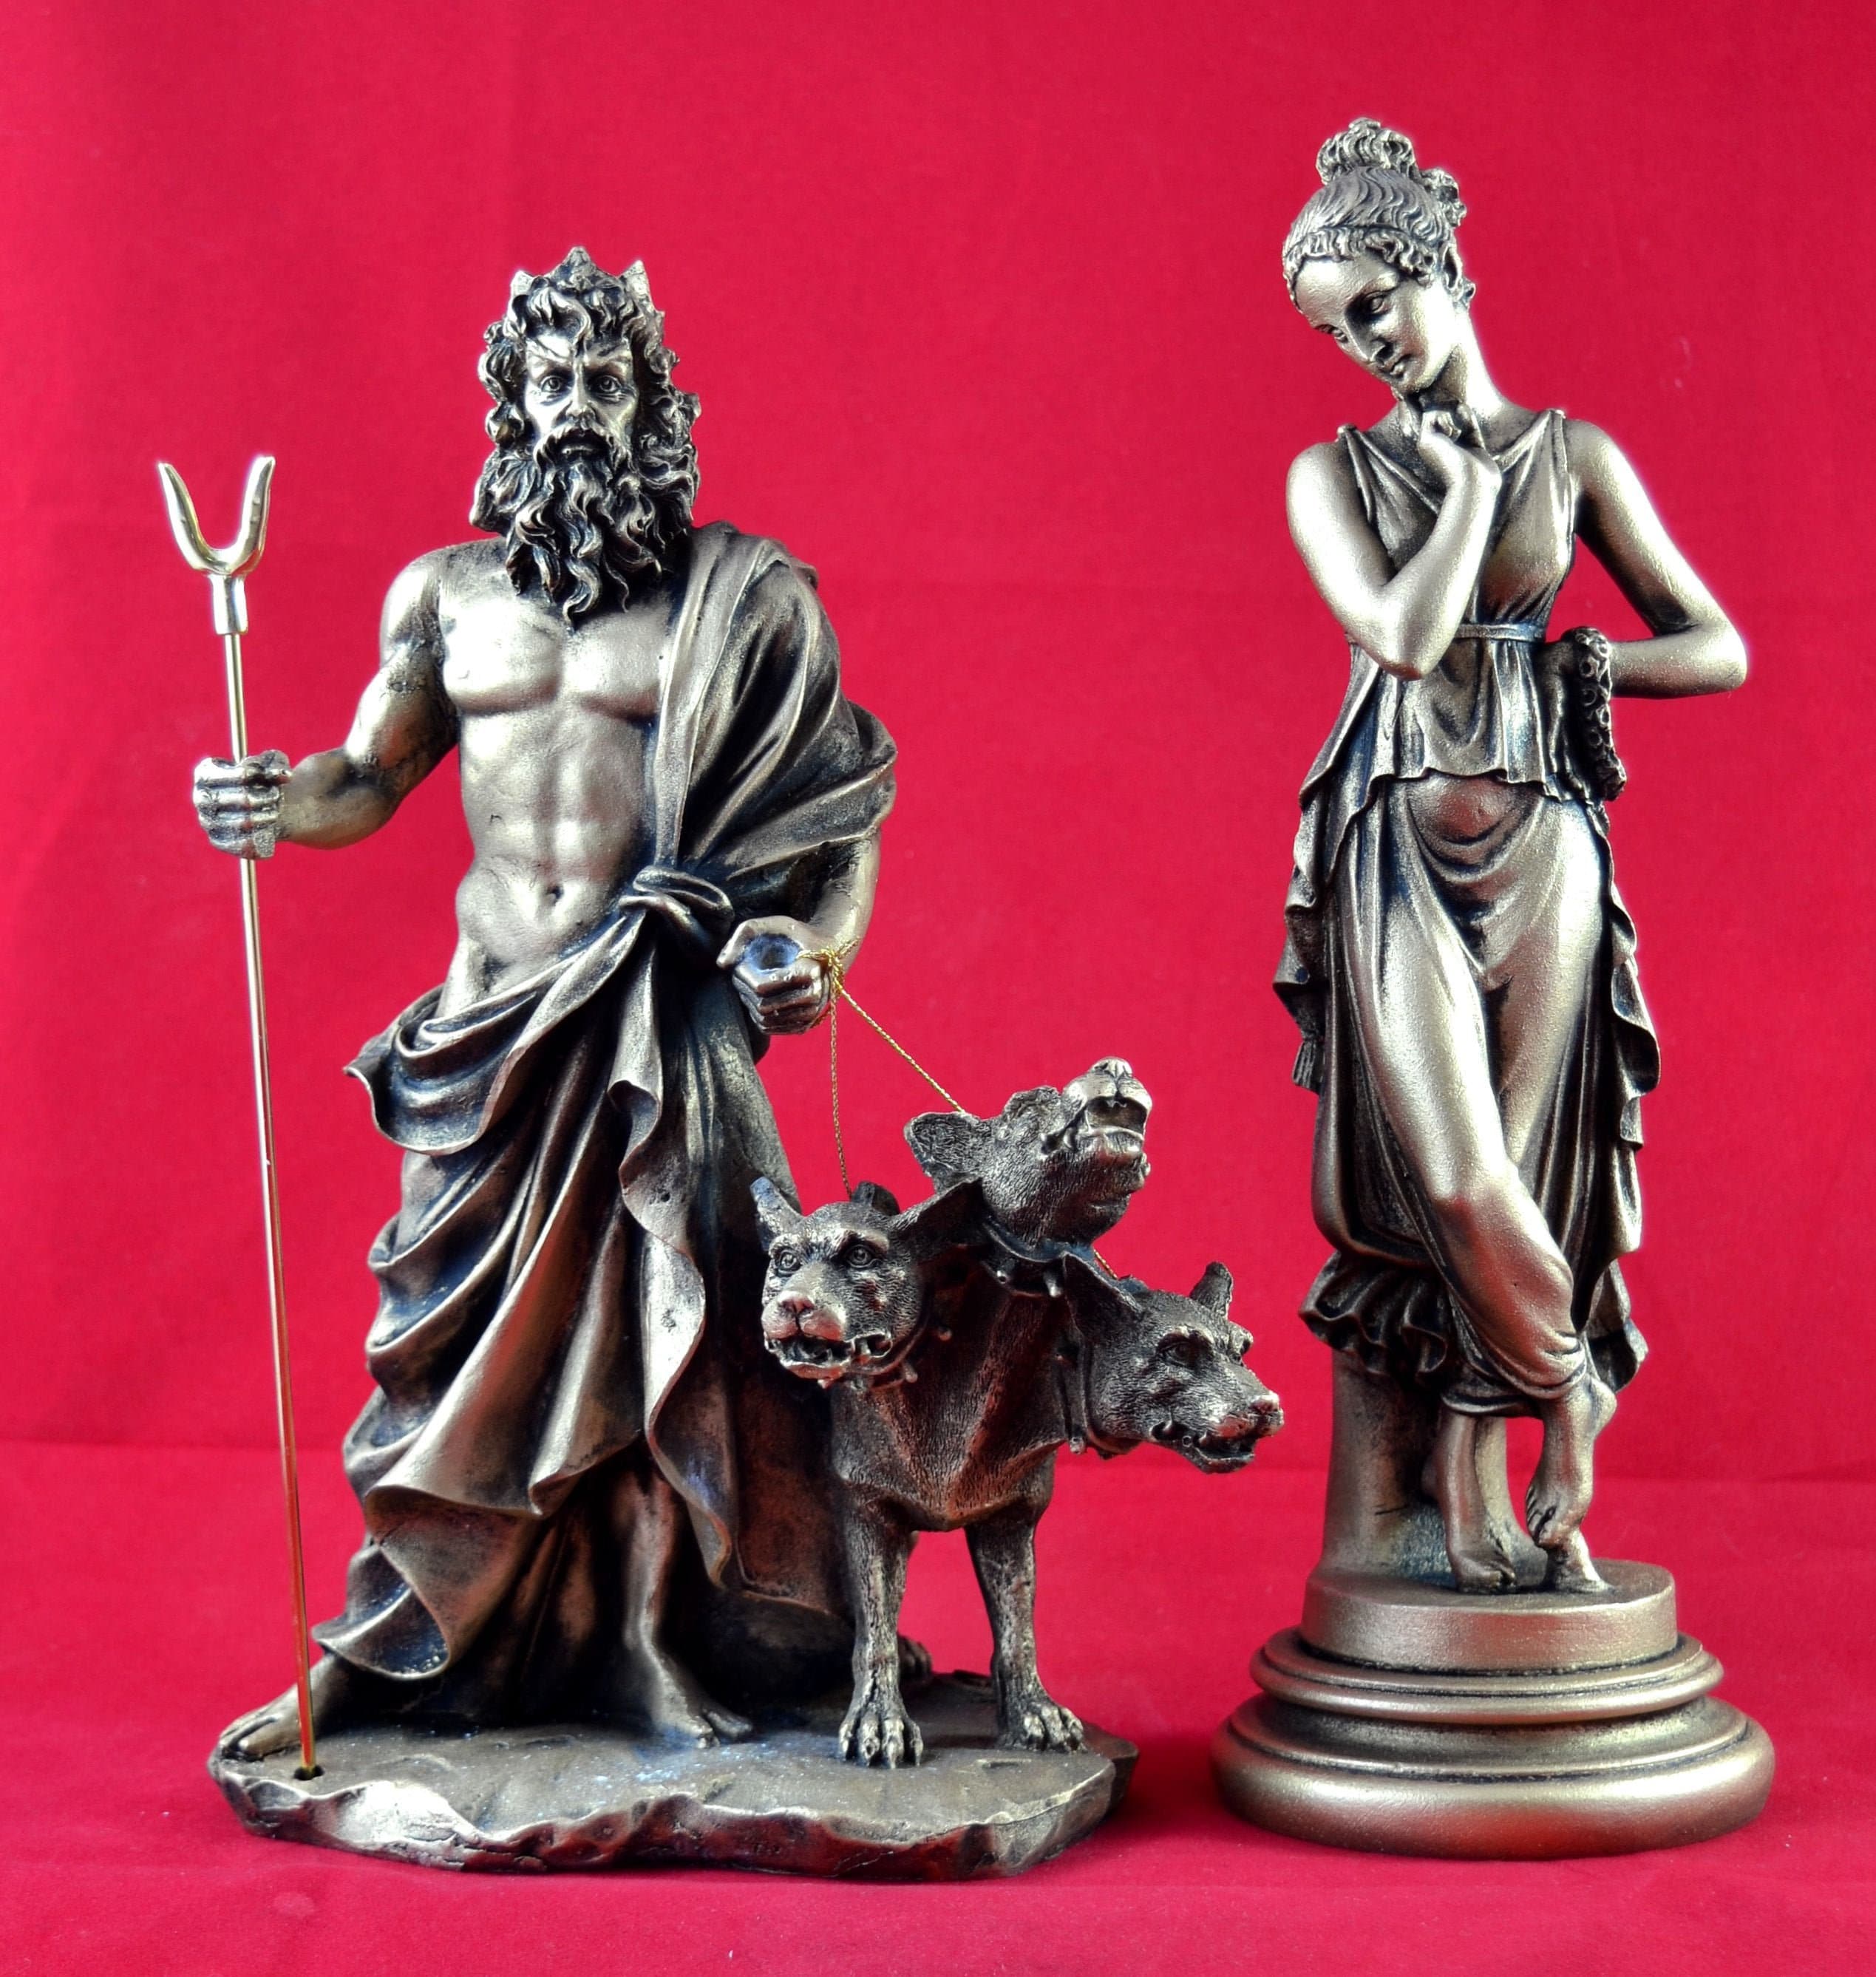 Persephone Goddess Queen of the Underworld and Hades Gold Patina